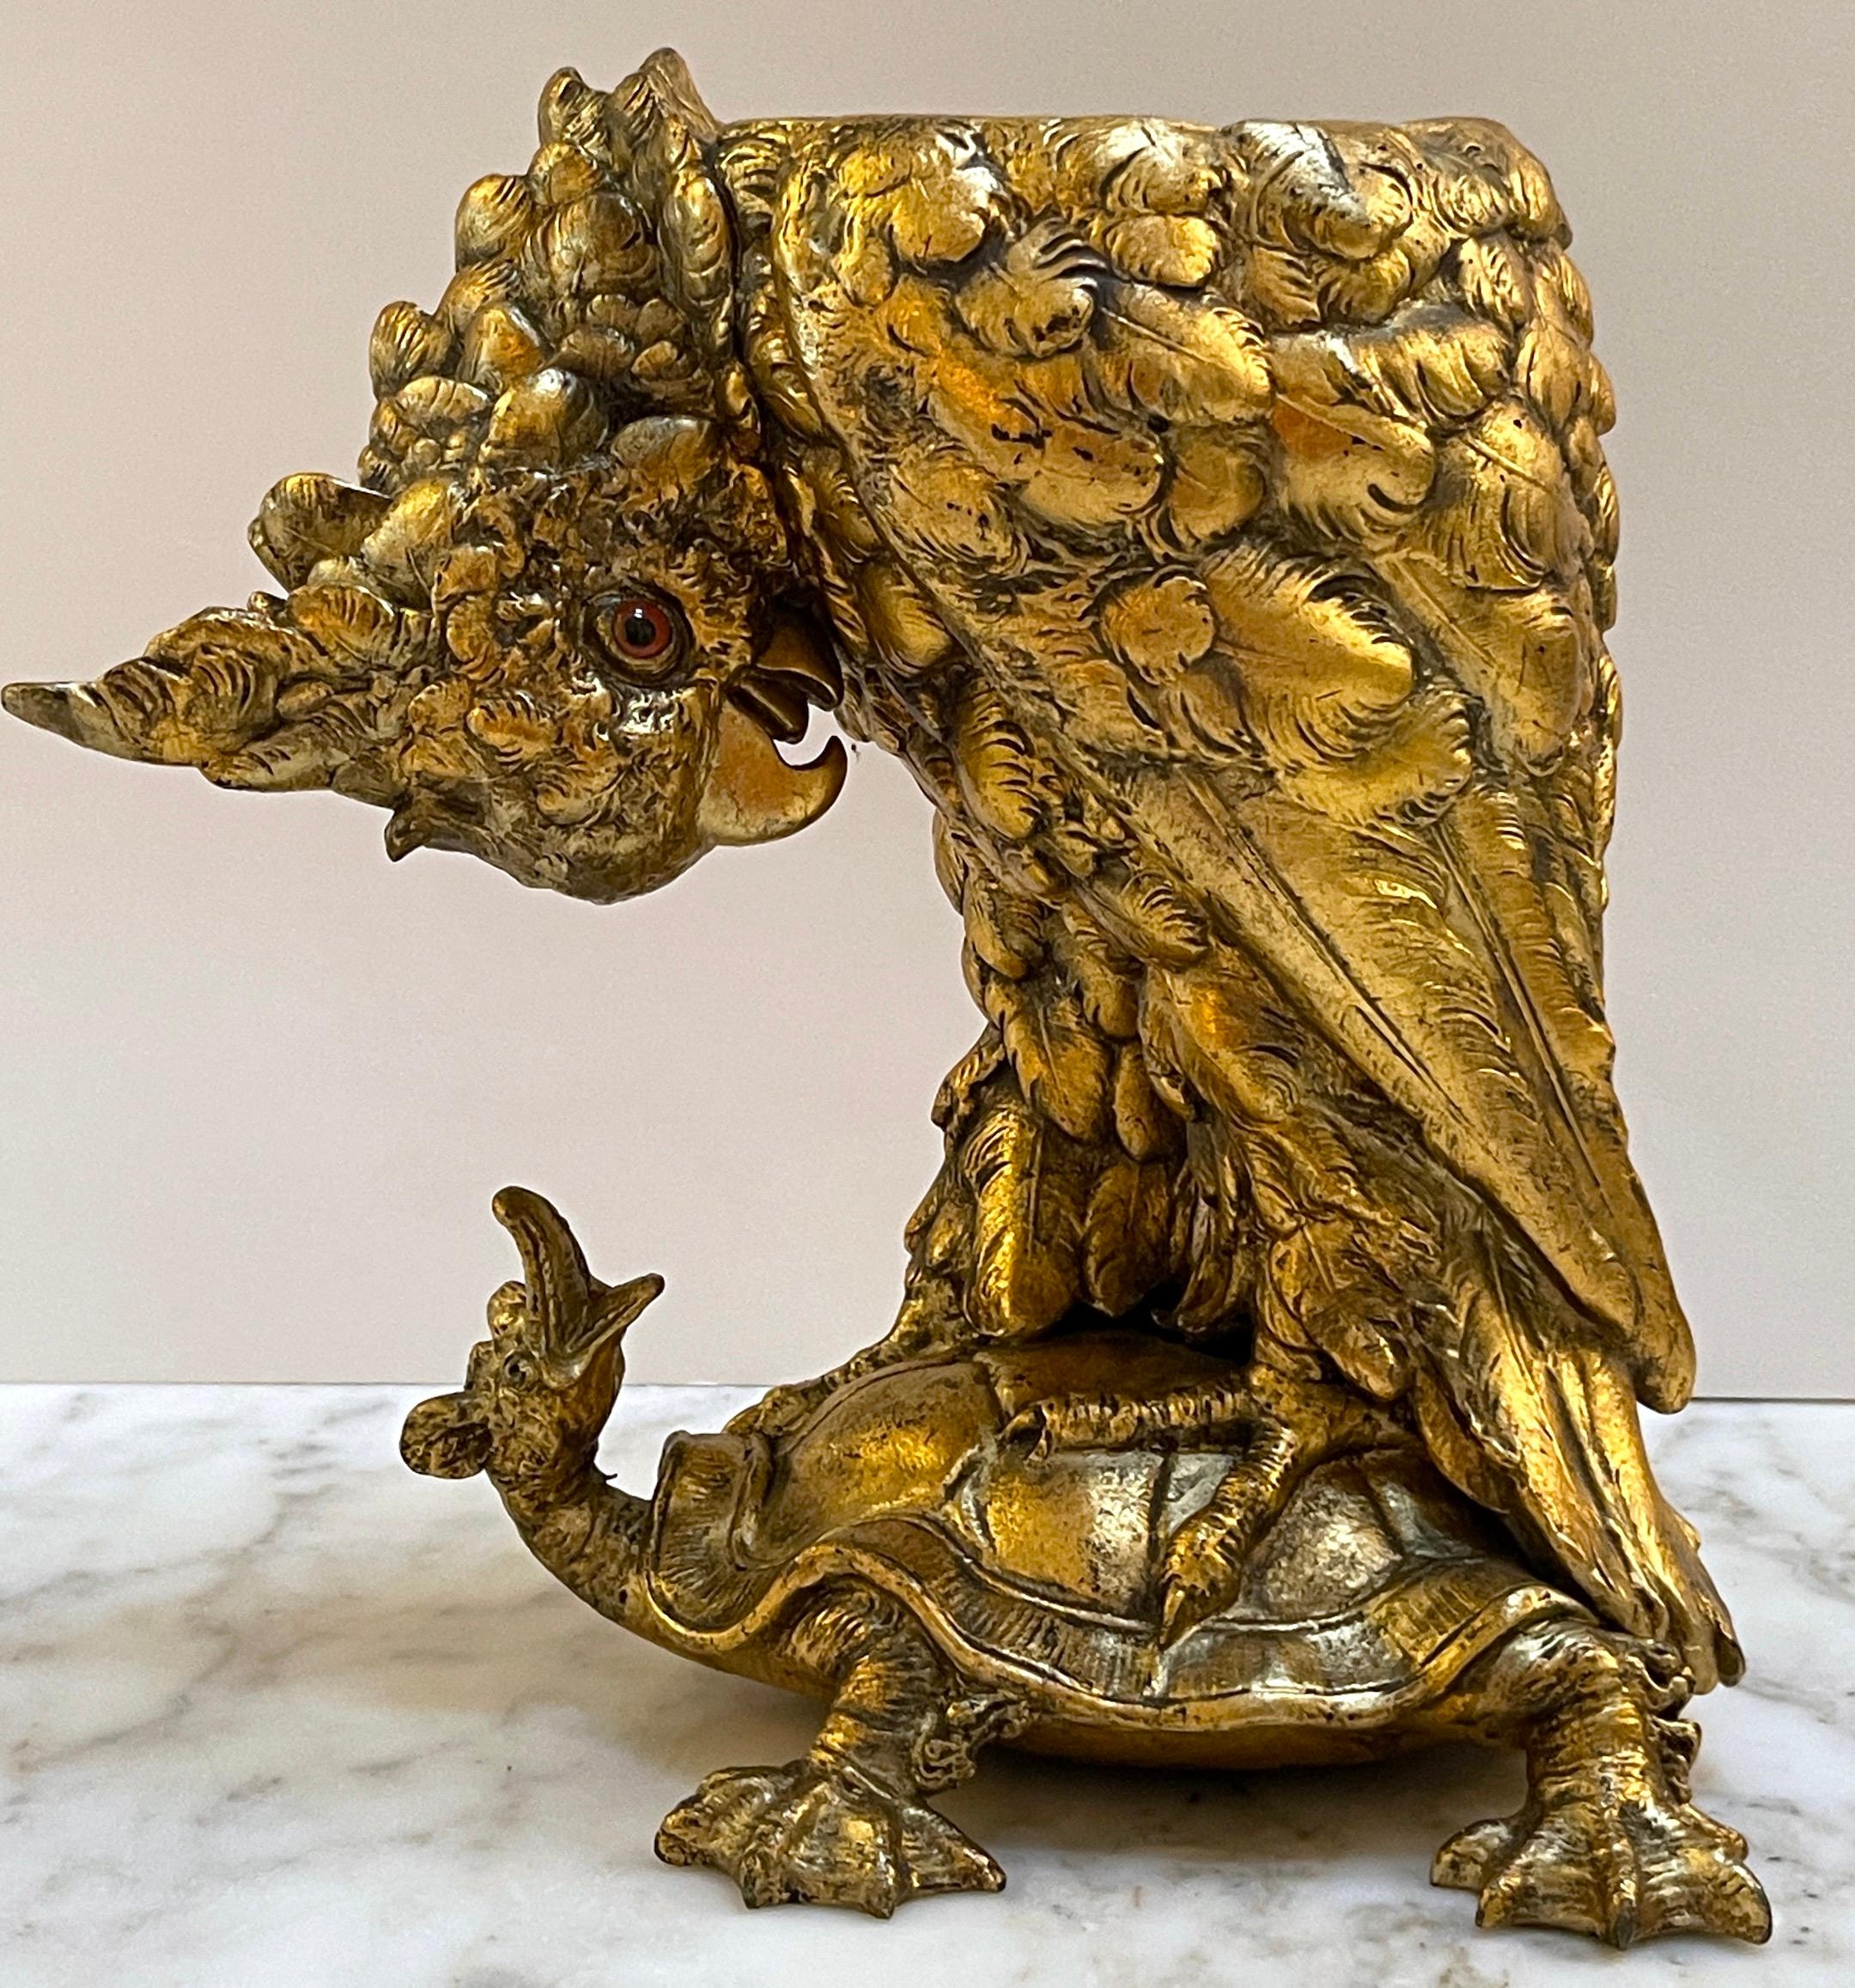 Aesthetic Gilt Metal Cockatoo & Turtle Figural Cachepot 
USa, circa 1900s

Of large Size and scale, realistically cast and modeled of Cockatoo with inset glass eye, standing on a turtle. 

Overall measurements 12-Inches high x 12-Inches wide x